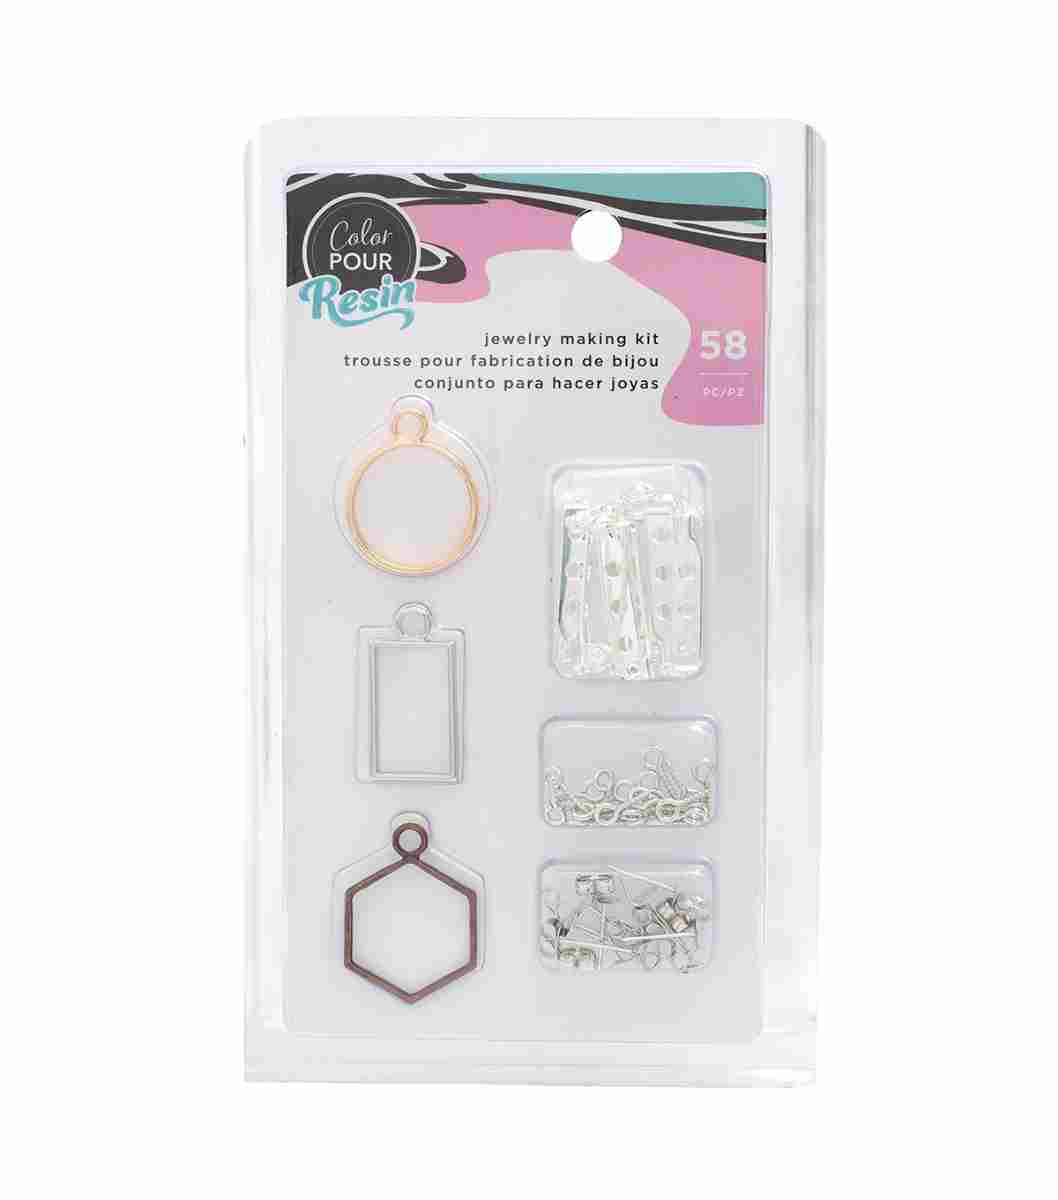 Jewelry Making Kit - Color Pour Resin - American Crafts*